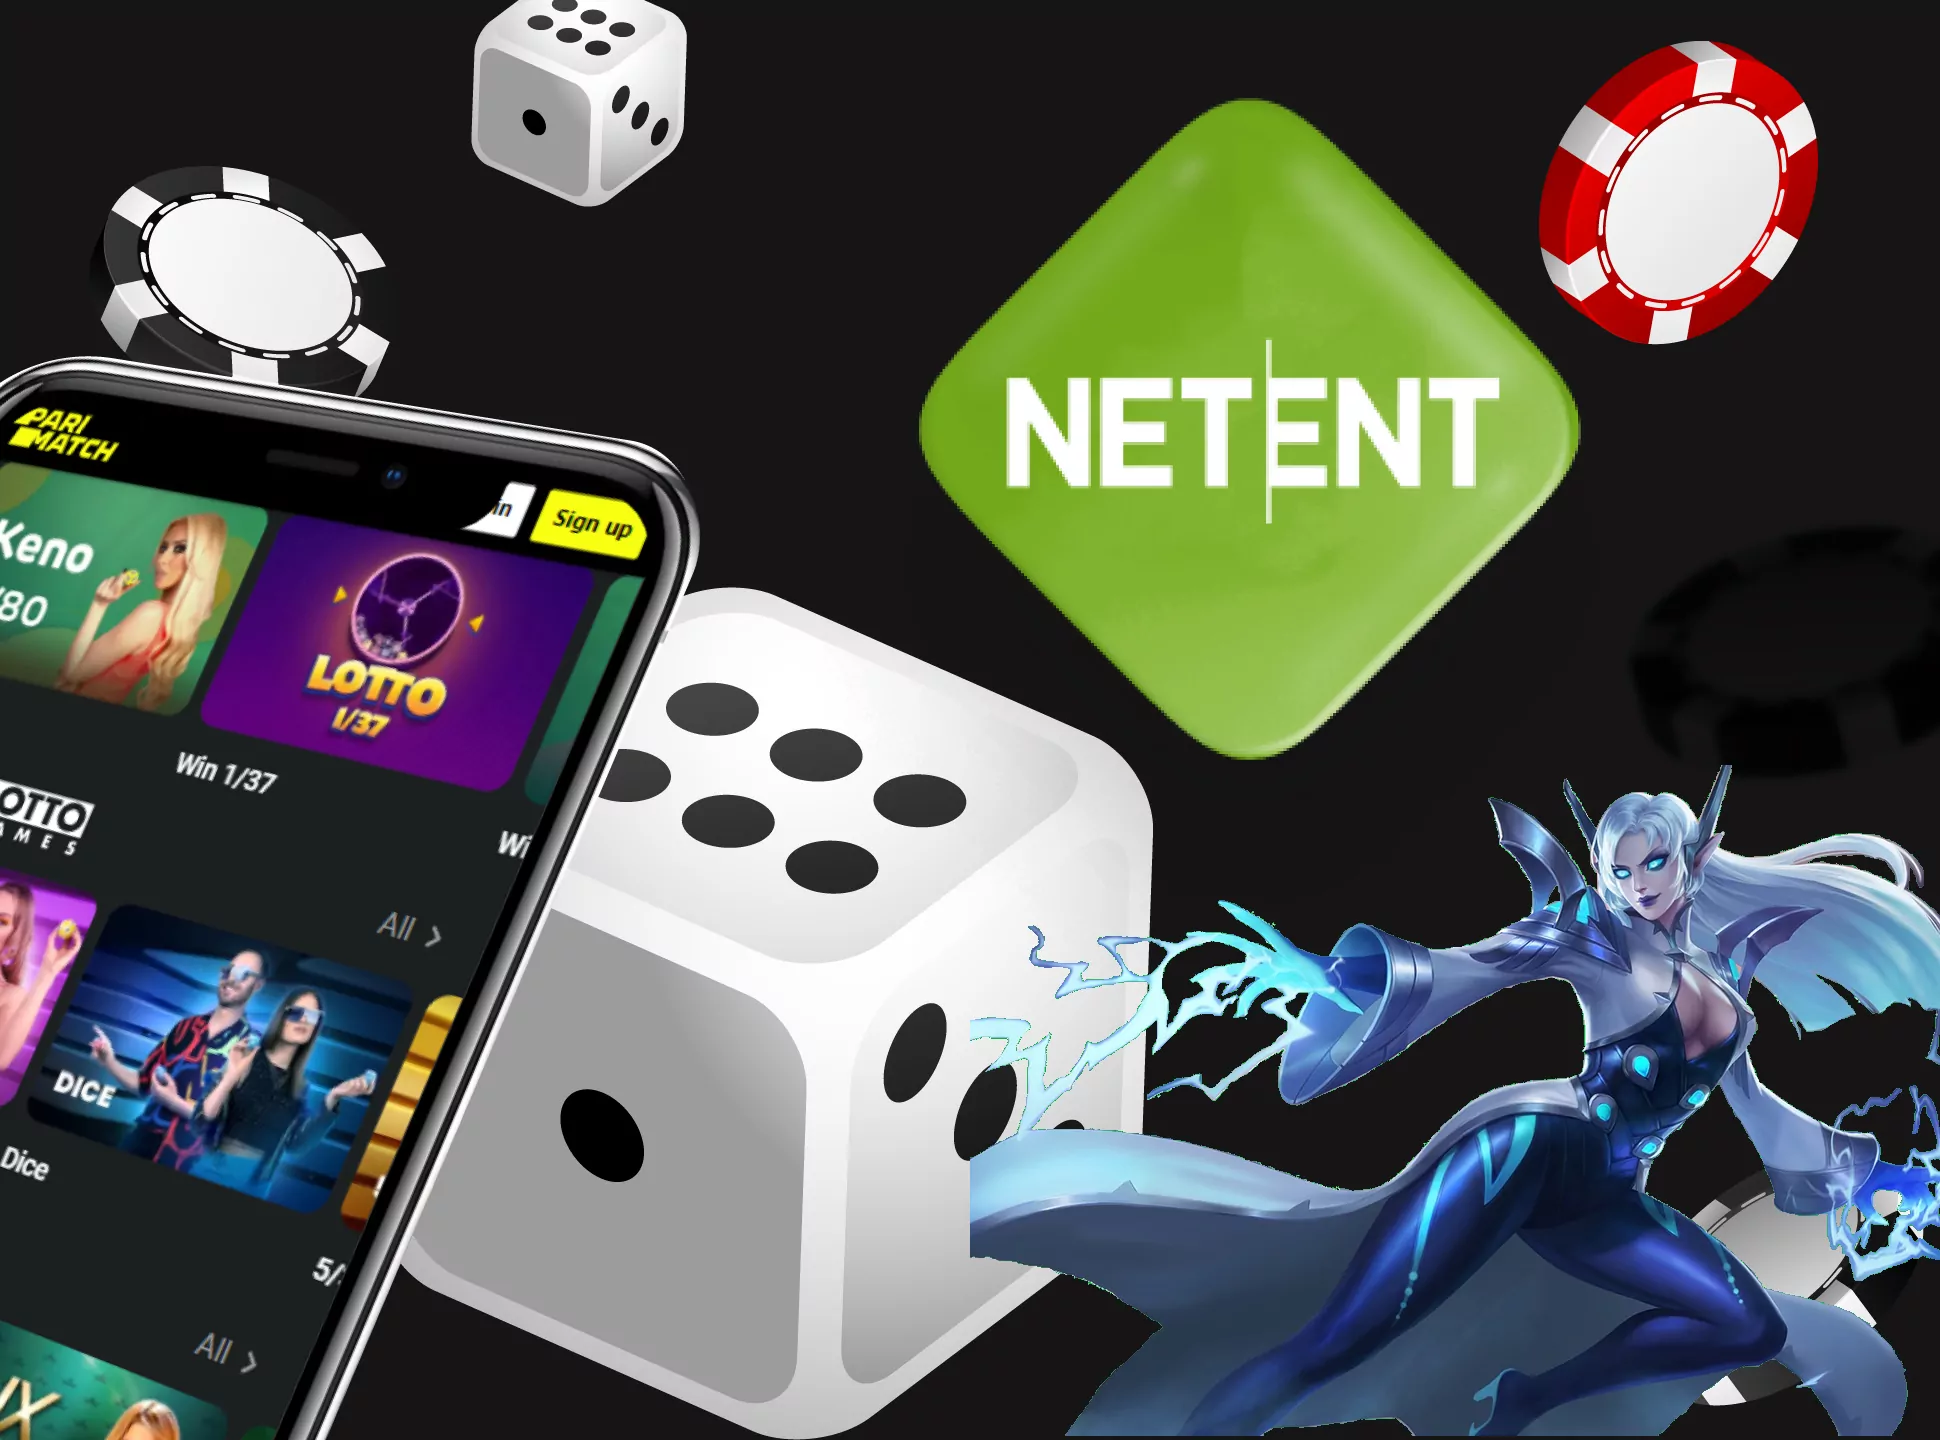 You will find various games from NetnEnt.